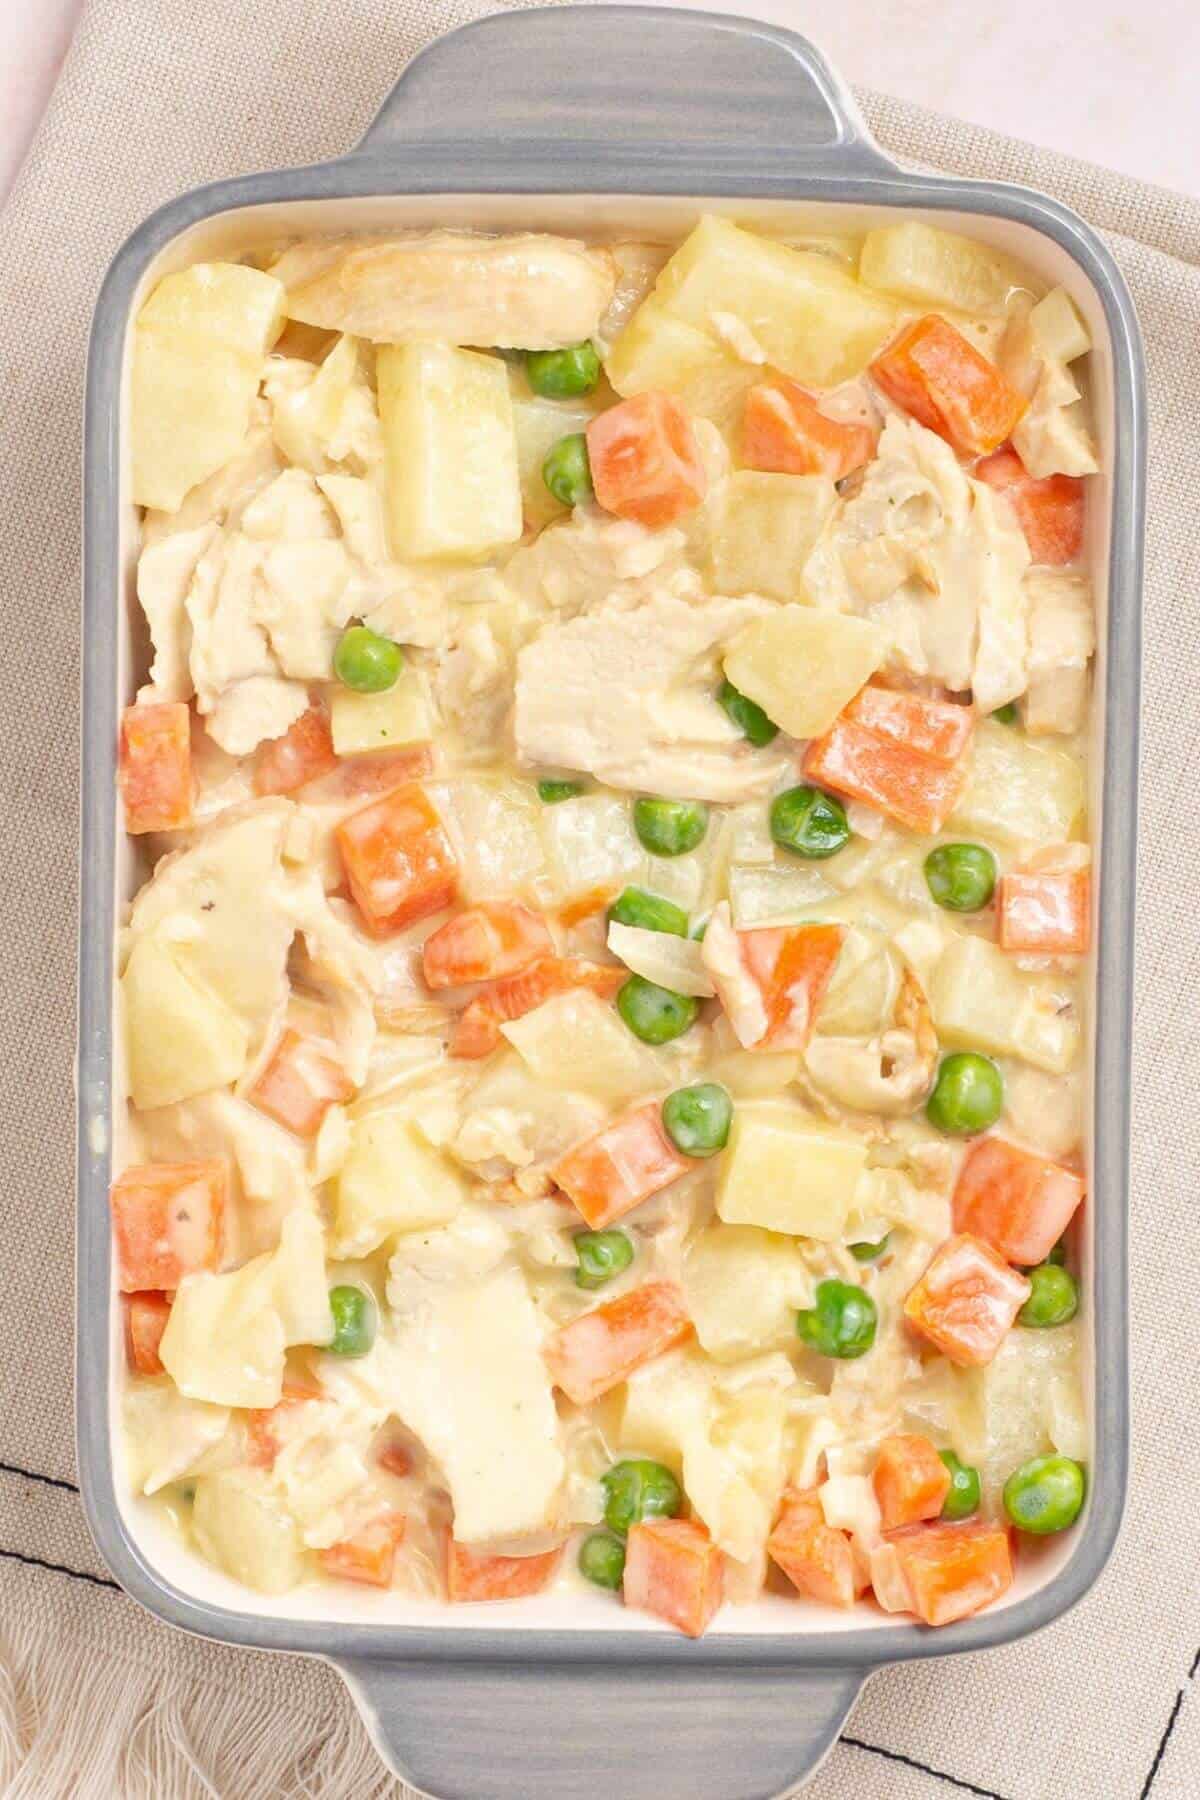 Chicken pot pie filling added to small casserole pan.